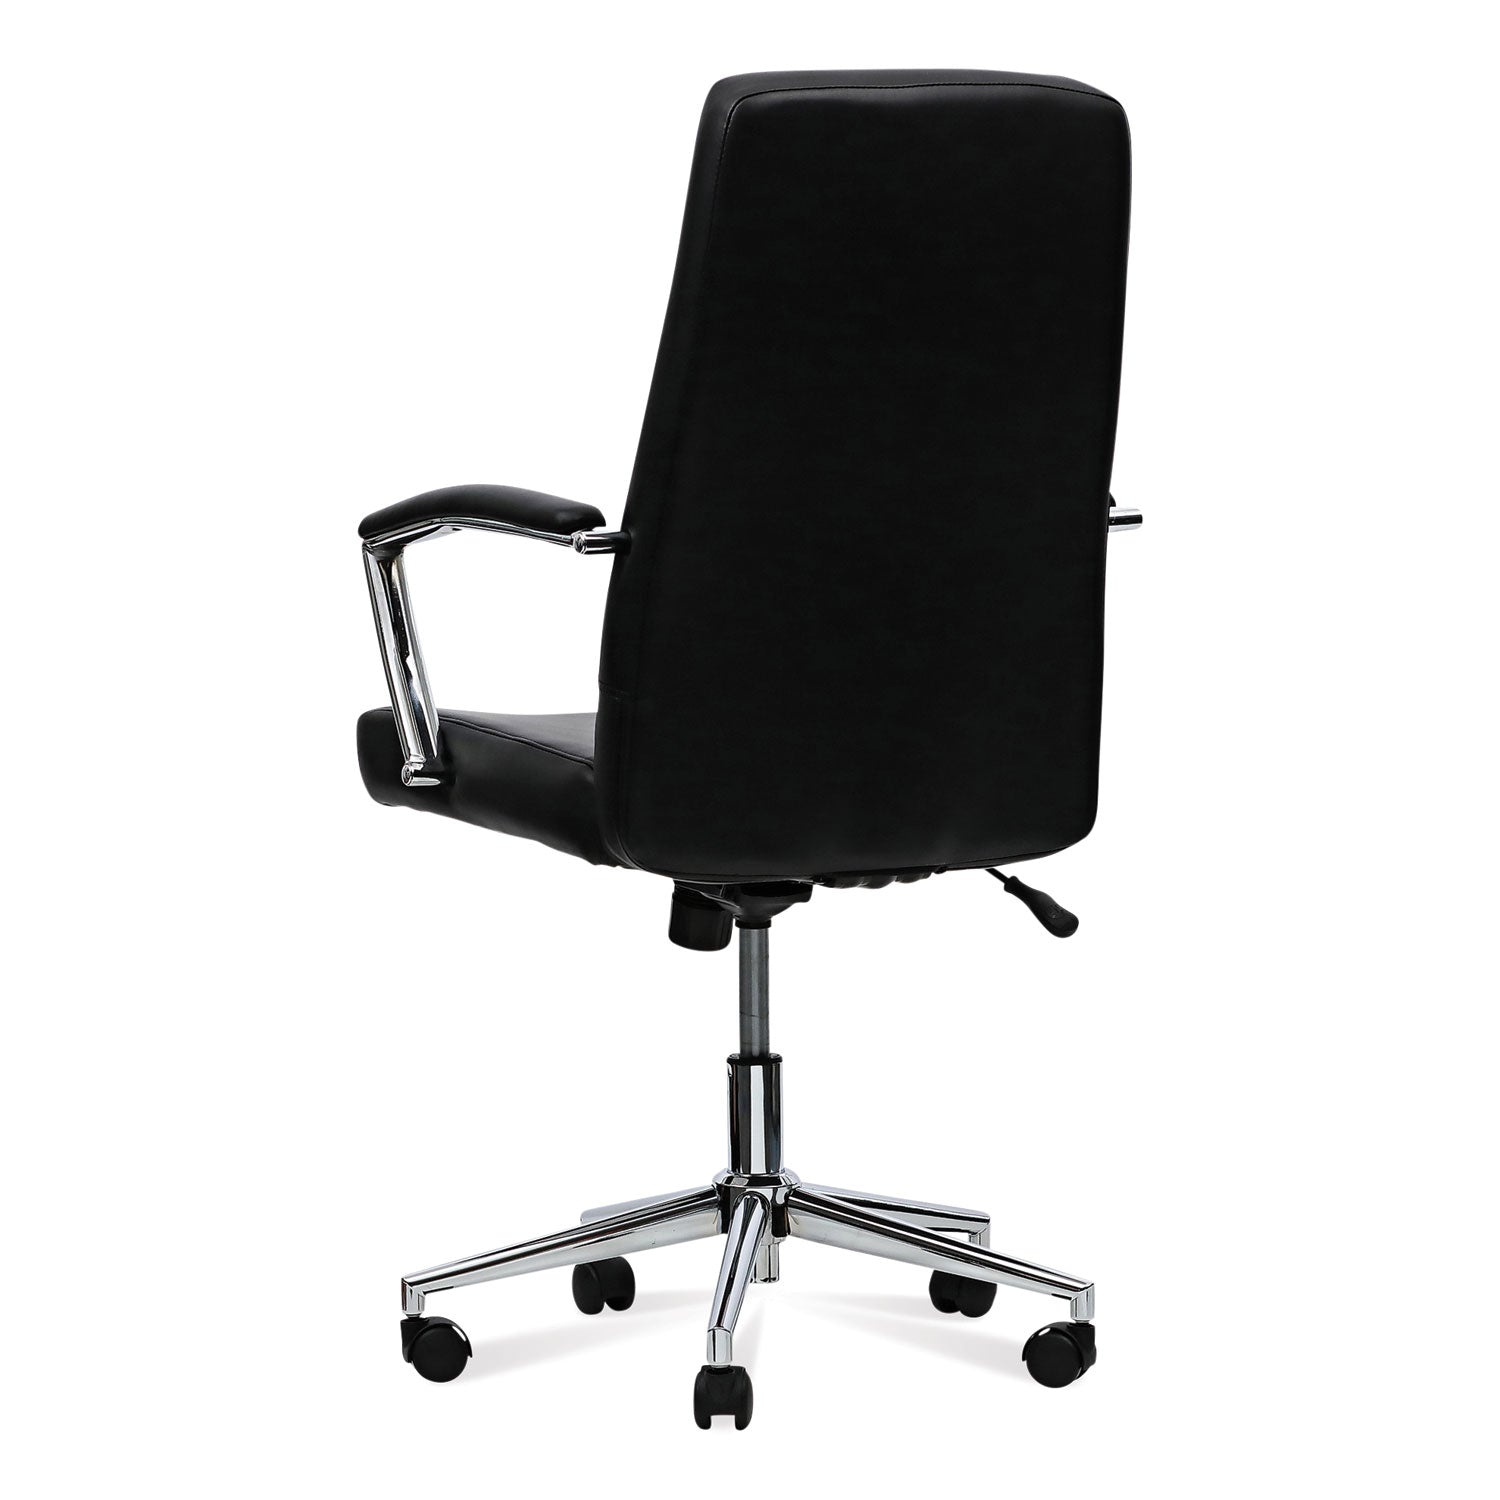 leather-task-chair-supports-up-to-275-lb-1819-to-2193-seat-height-black-seat-black-back_alews4116 - 5